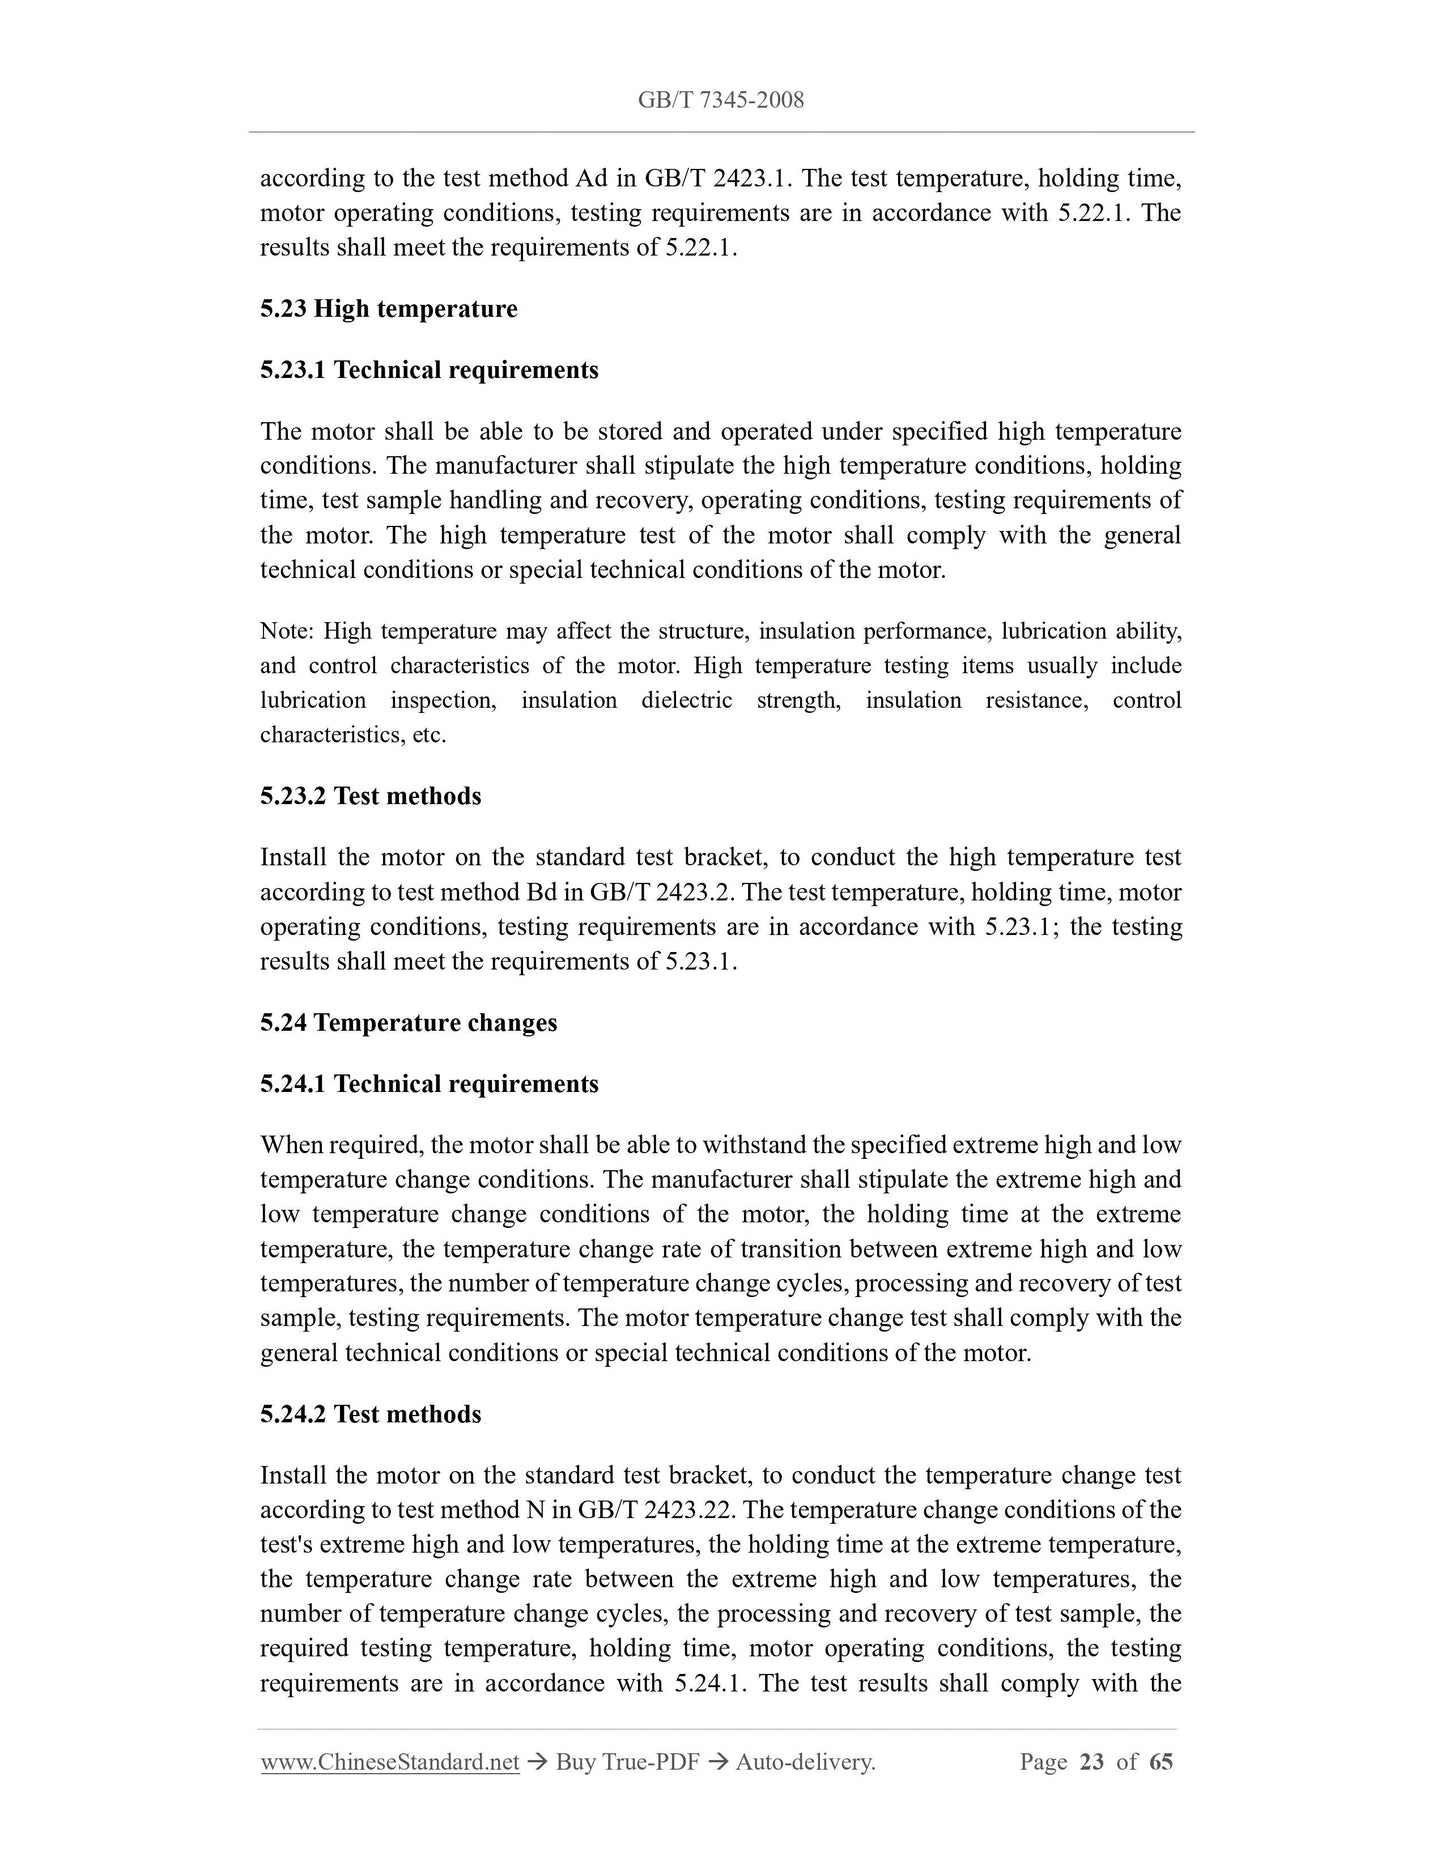 GB/T 7345-2008 Page 11